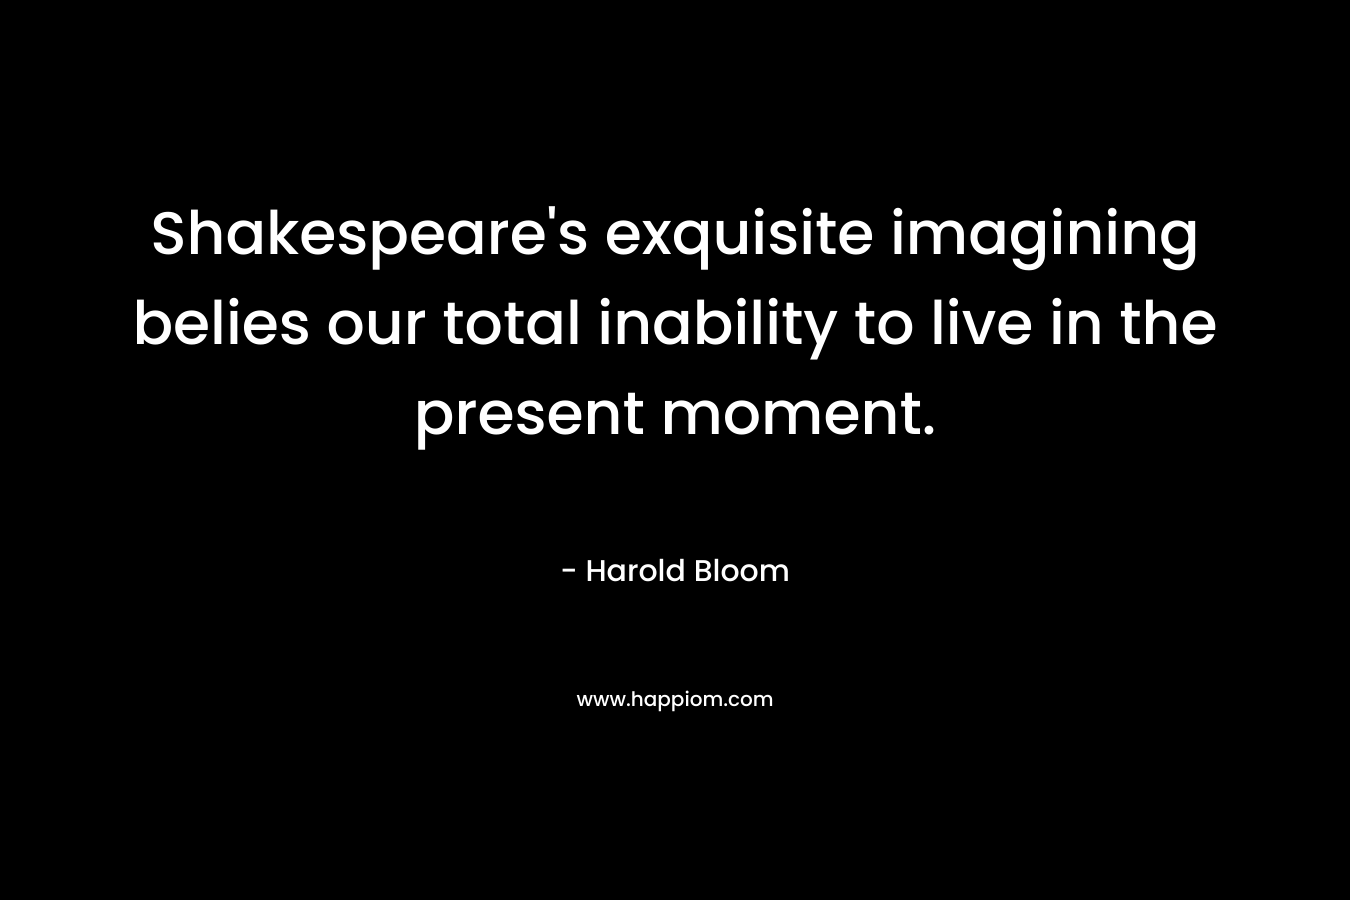 Shakespeare’s exquisite imagining belies our total inability to live in the present moment. – Harold Bloom